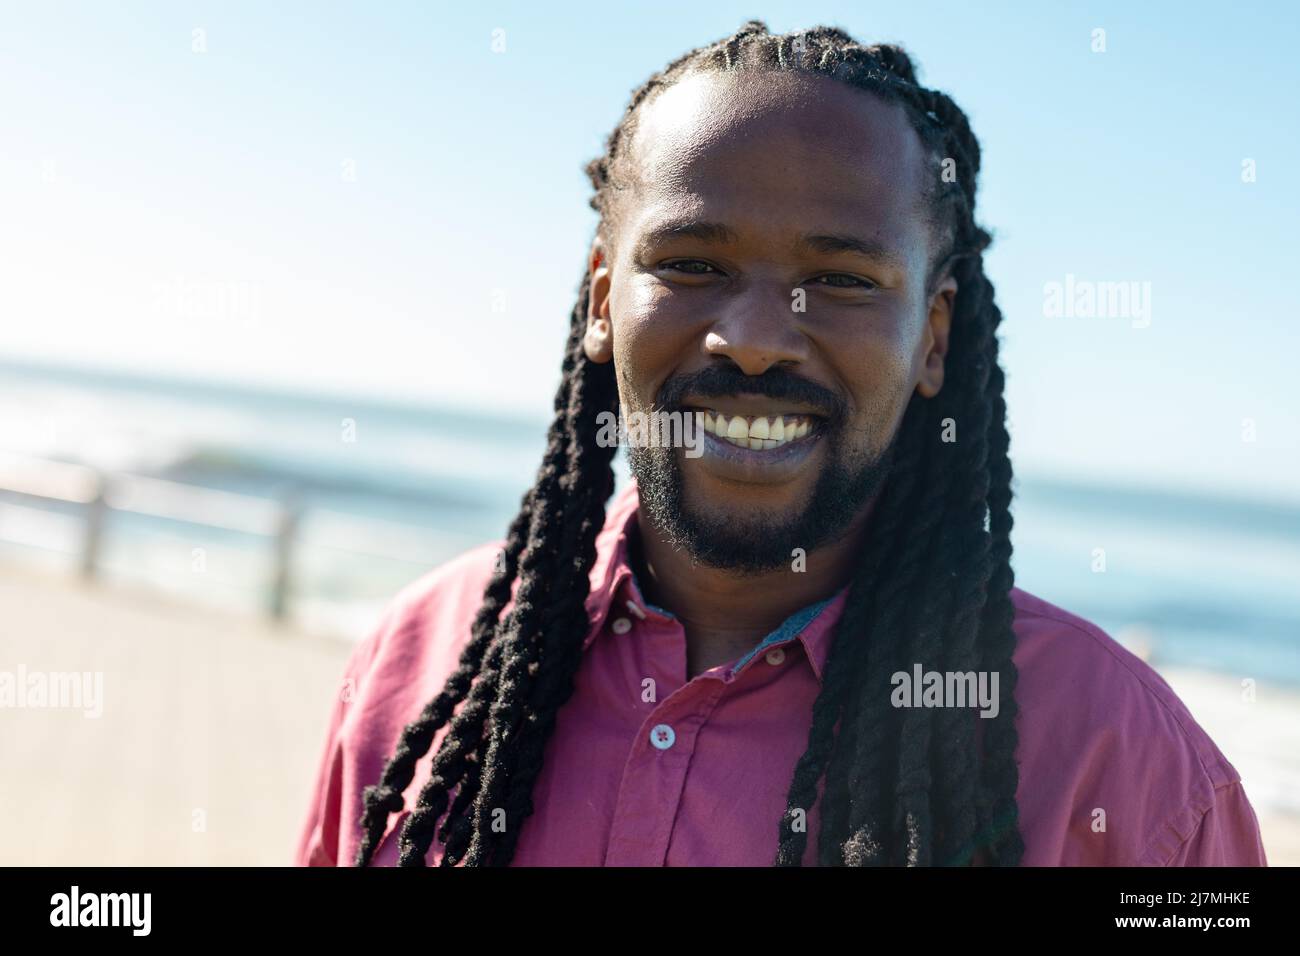 Portrait of smiling african american man with long braided black hair on sunny day Stock Photo